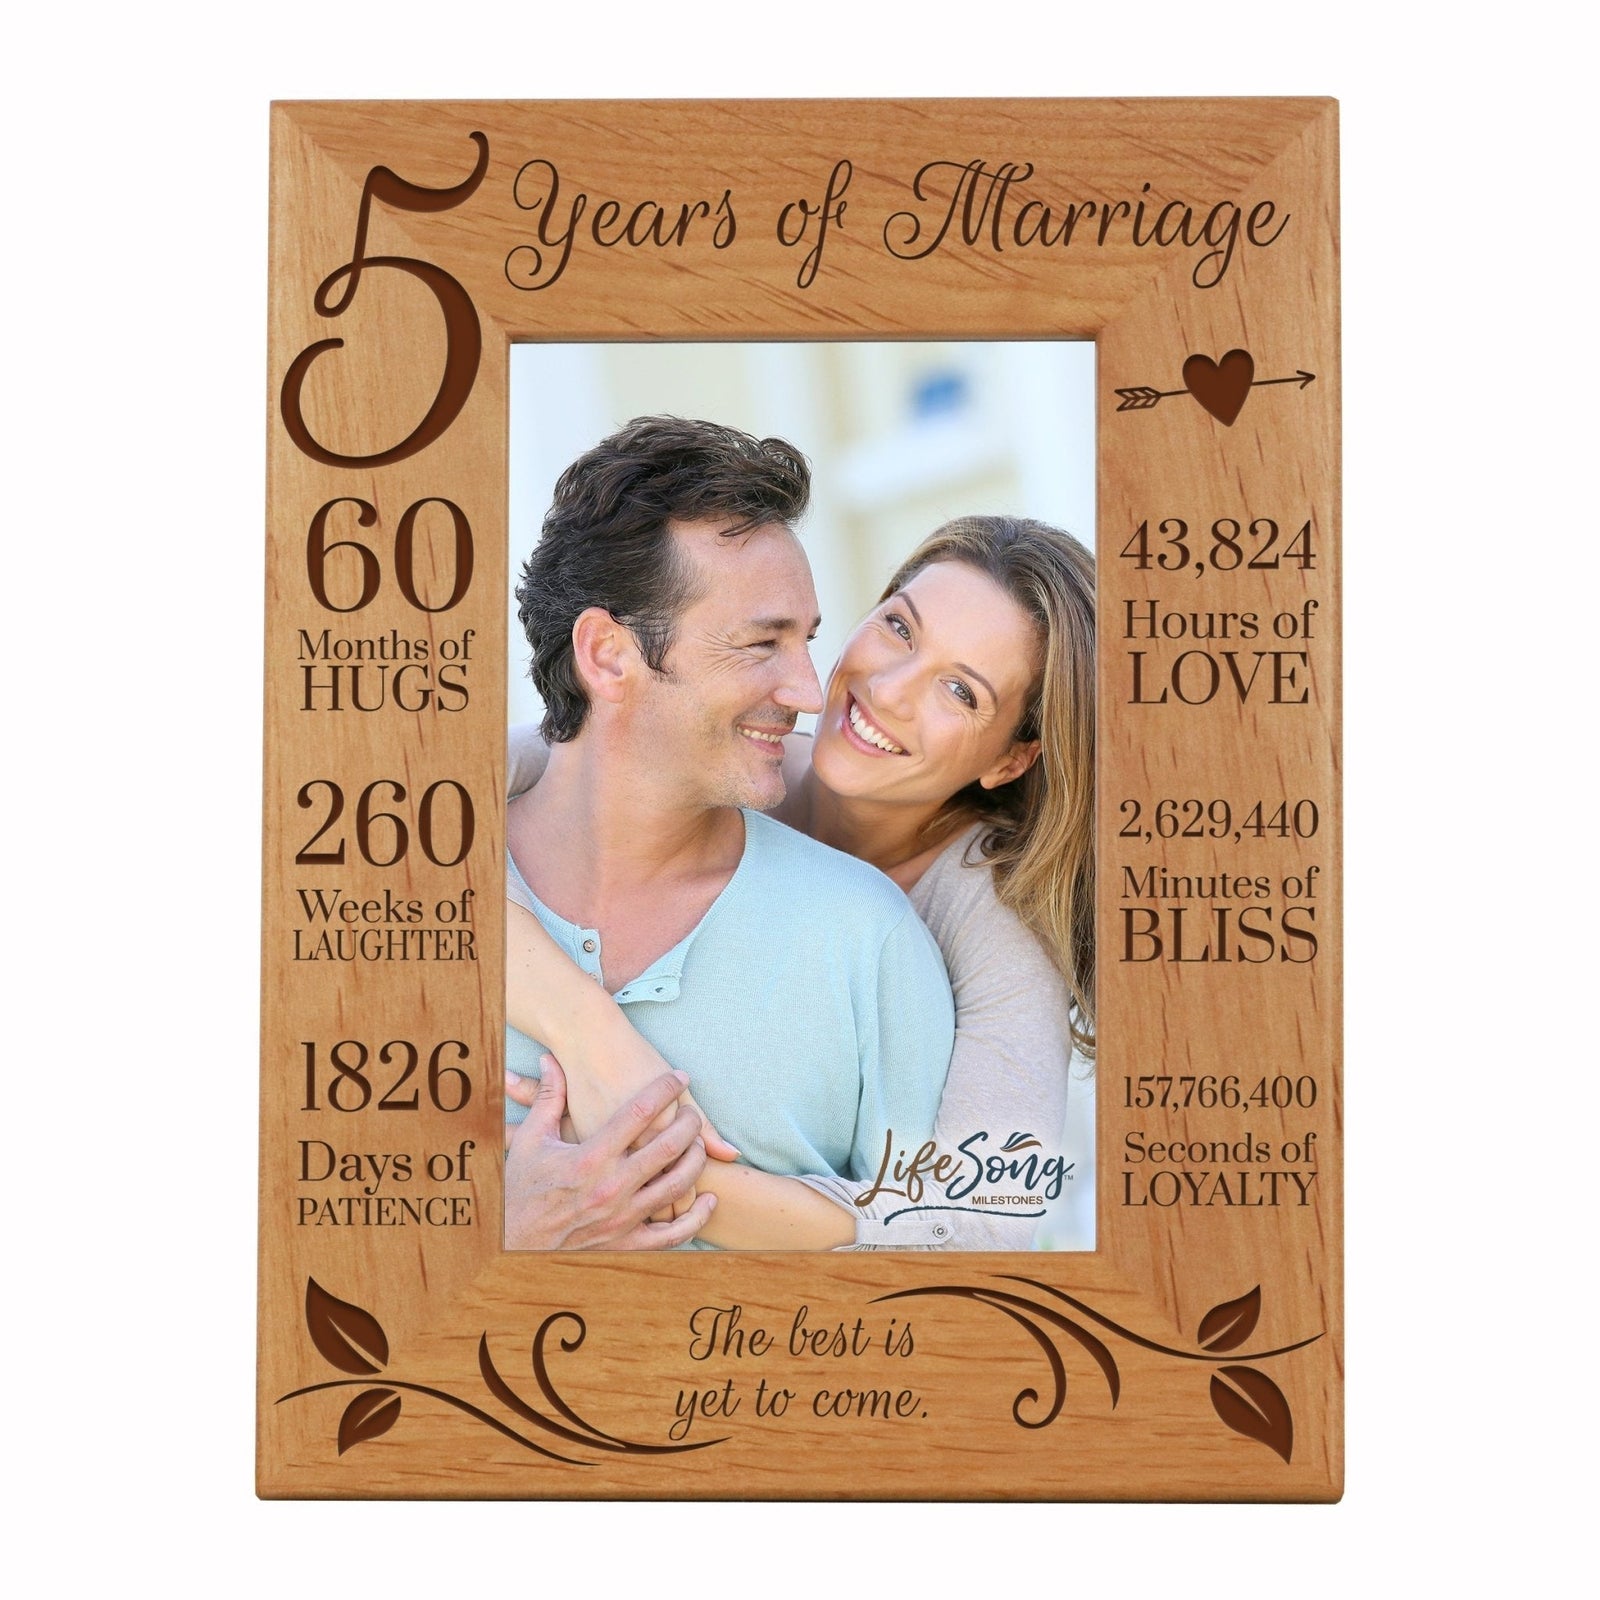 Engraved 5th Anniversary Picture Frame Gift for Couples - The Best Is Yet To Come - LifeSong Milestones